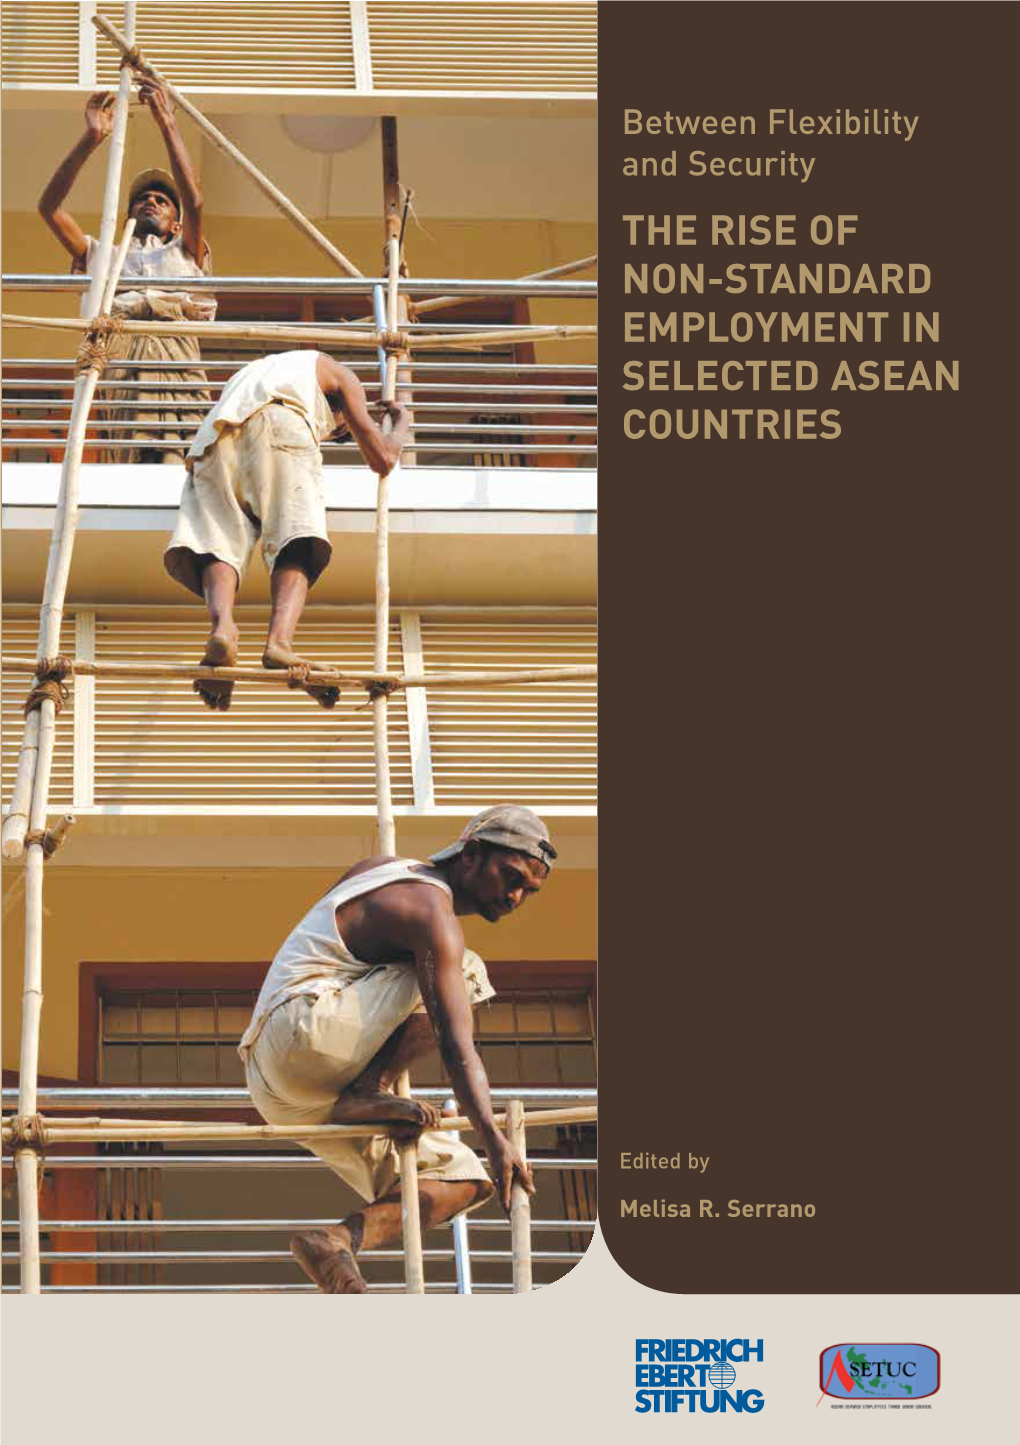 The Rise of Non-Standard Employment in Selected Asean Countries